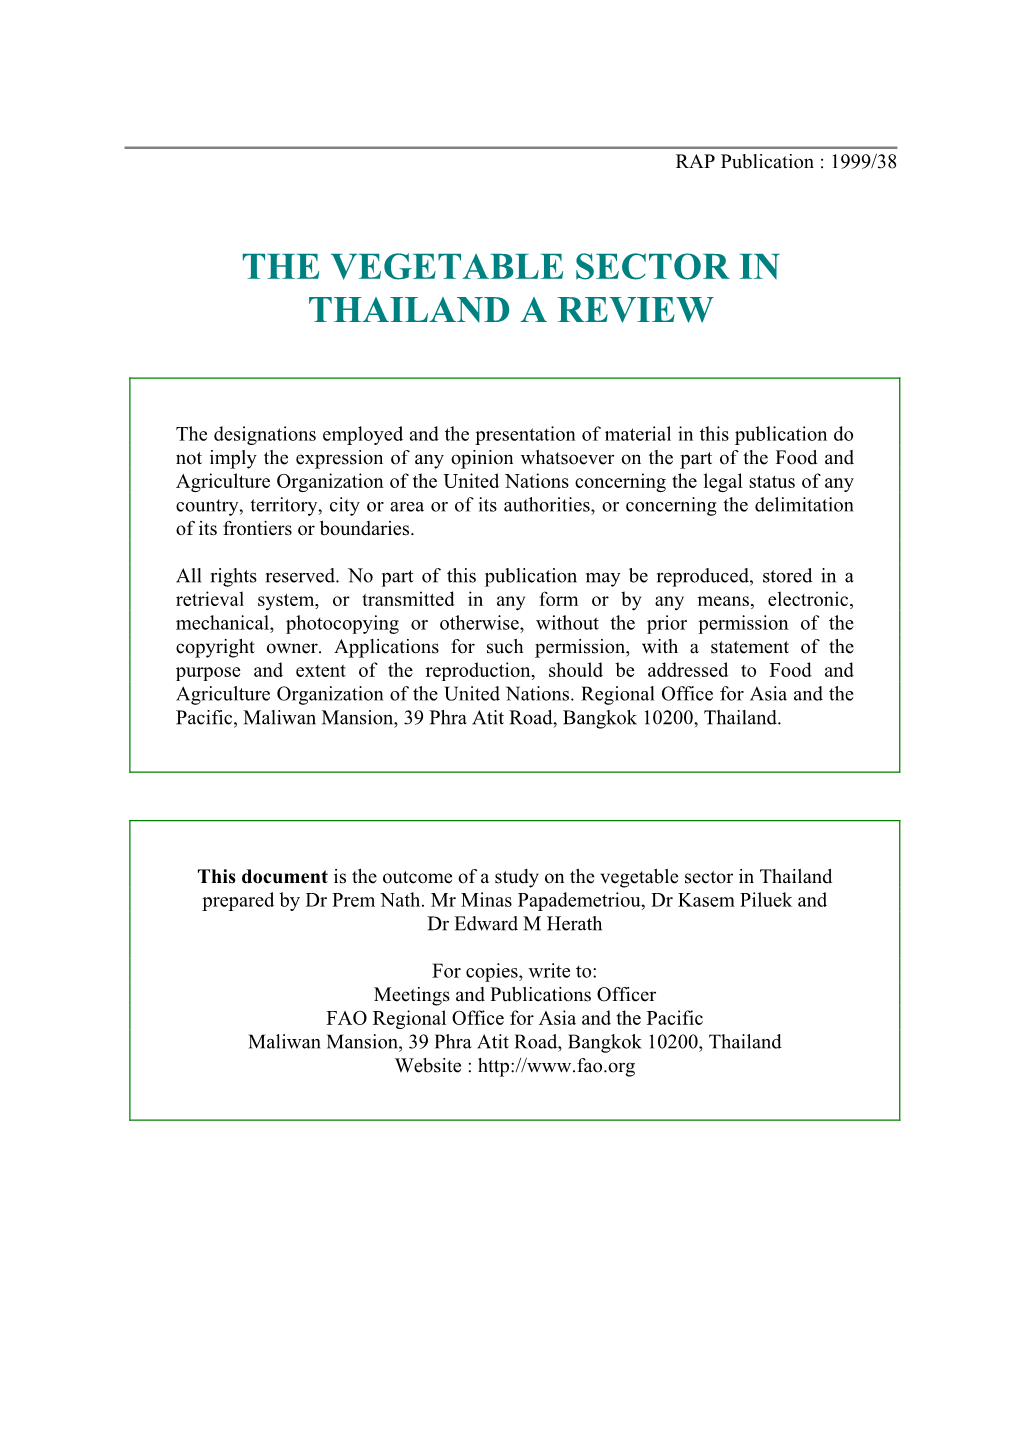 The Vegetable Sector in Thailand a Review